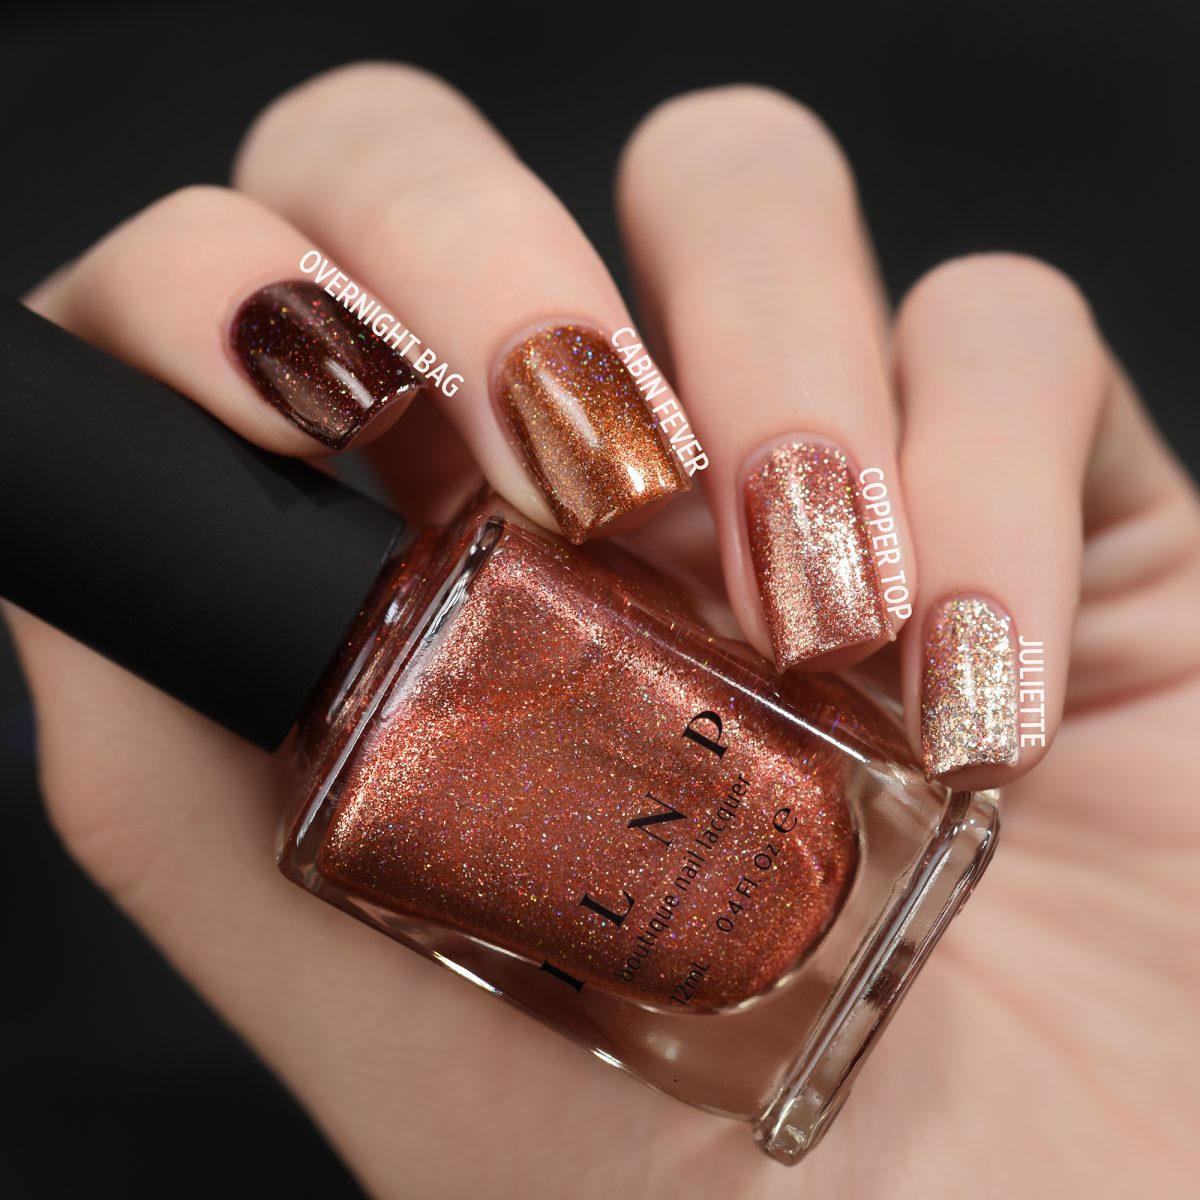 Copper Top - Copper Holographic Ultra Metallic Nail Polish by ILNP